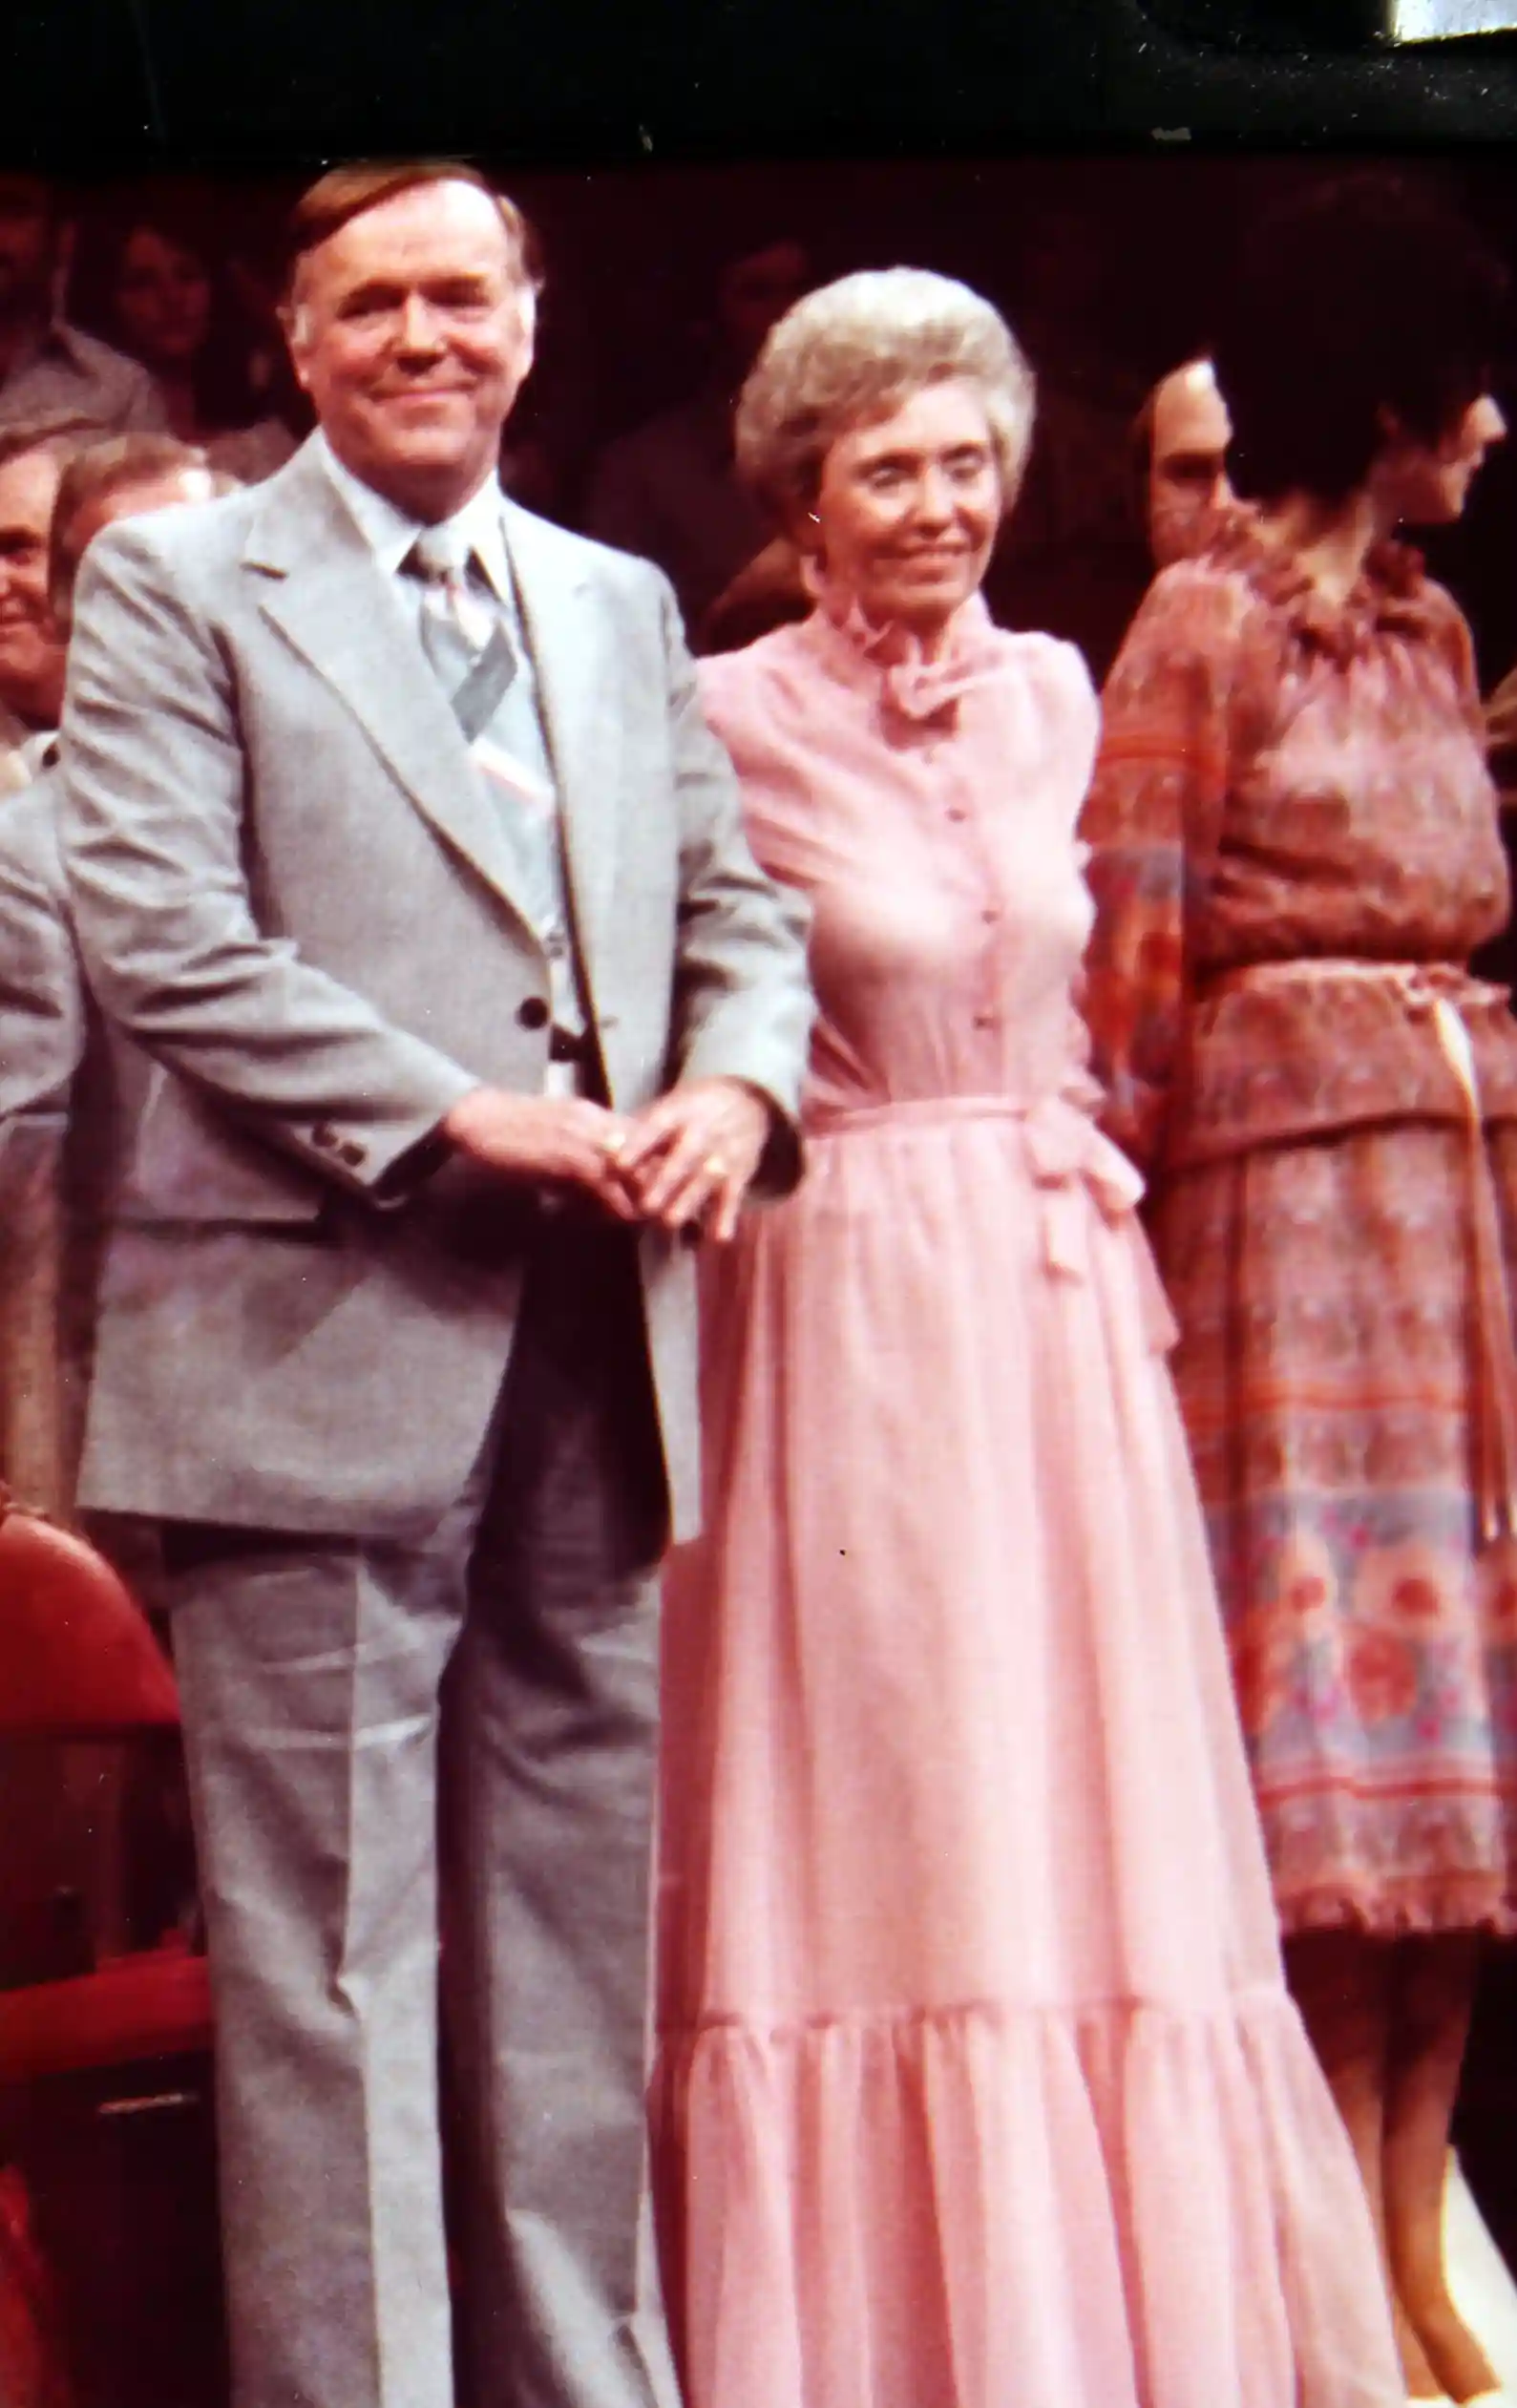 Brother Hagin and Oretha with a pink dress